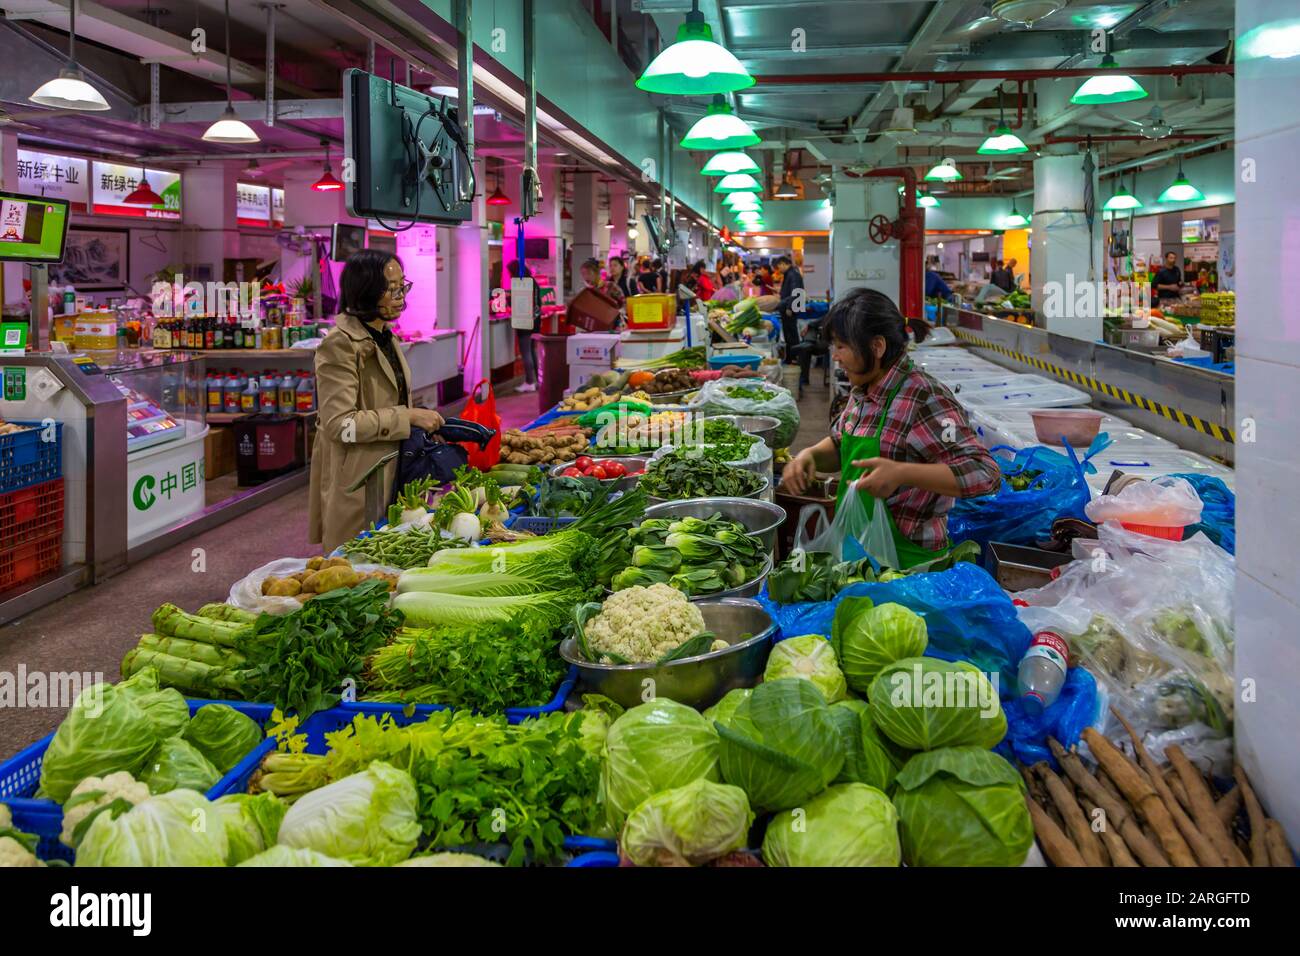 View of vegetable stall in busy market, Huangpu, Shanghai, China, Asia Stock Photo